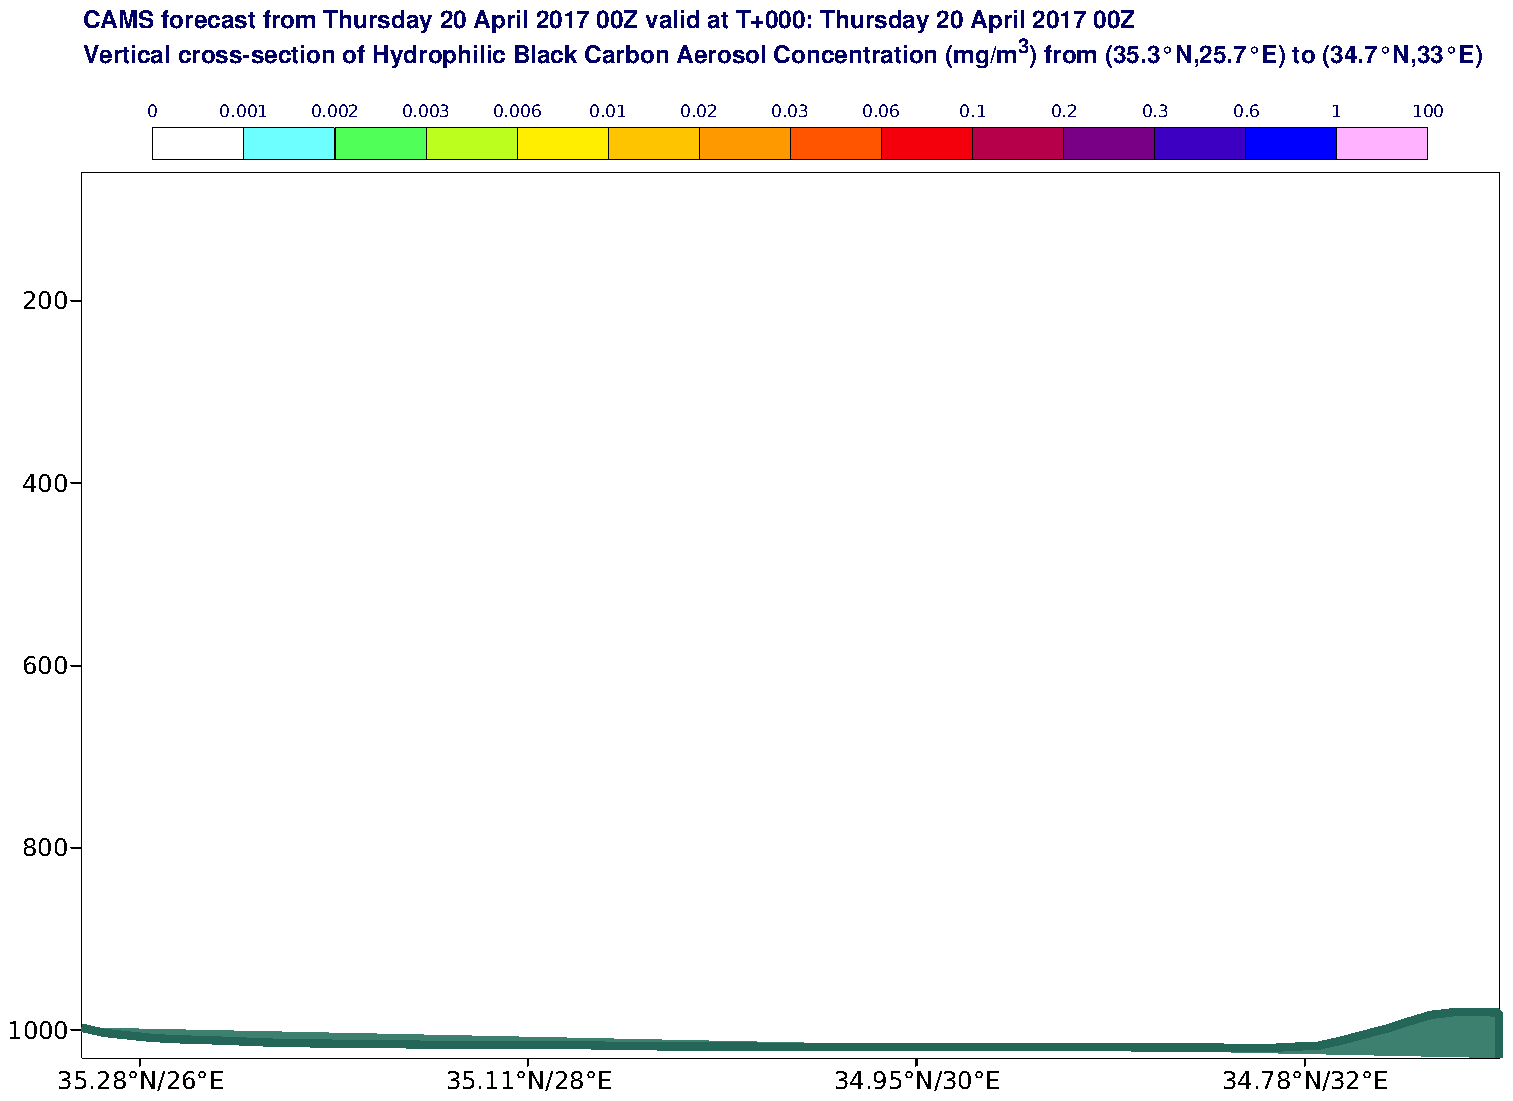 Vertical cross-section of Hydrophilic Black Carbon Aerosol Concentration (mg/m3) valid at T0 - 2017-04-20 00:00